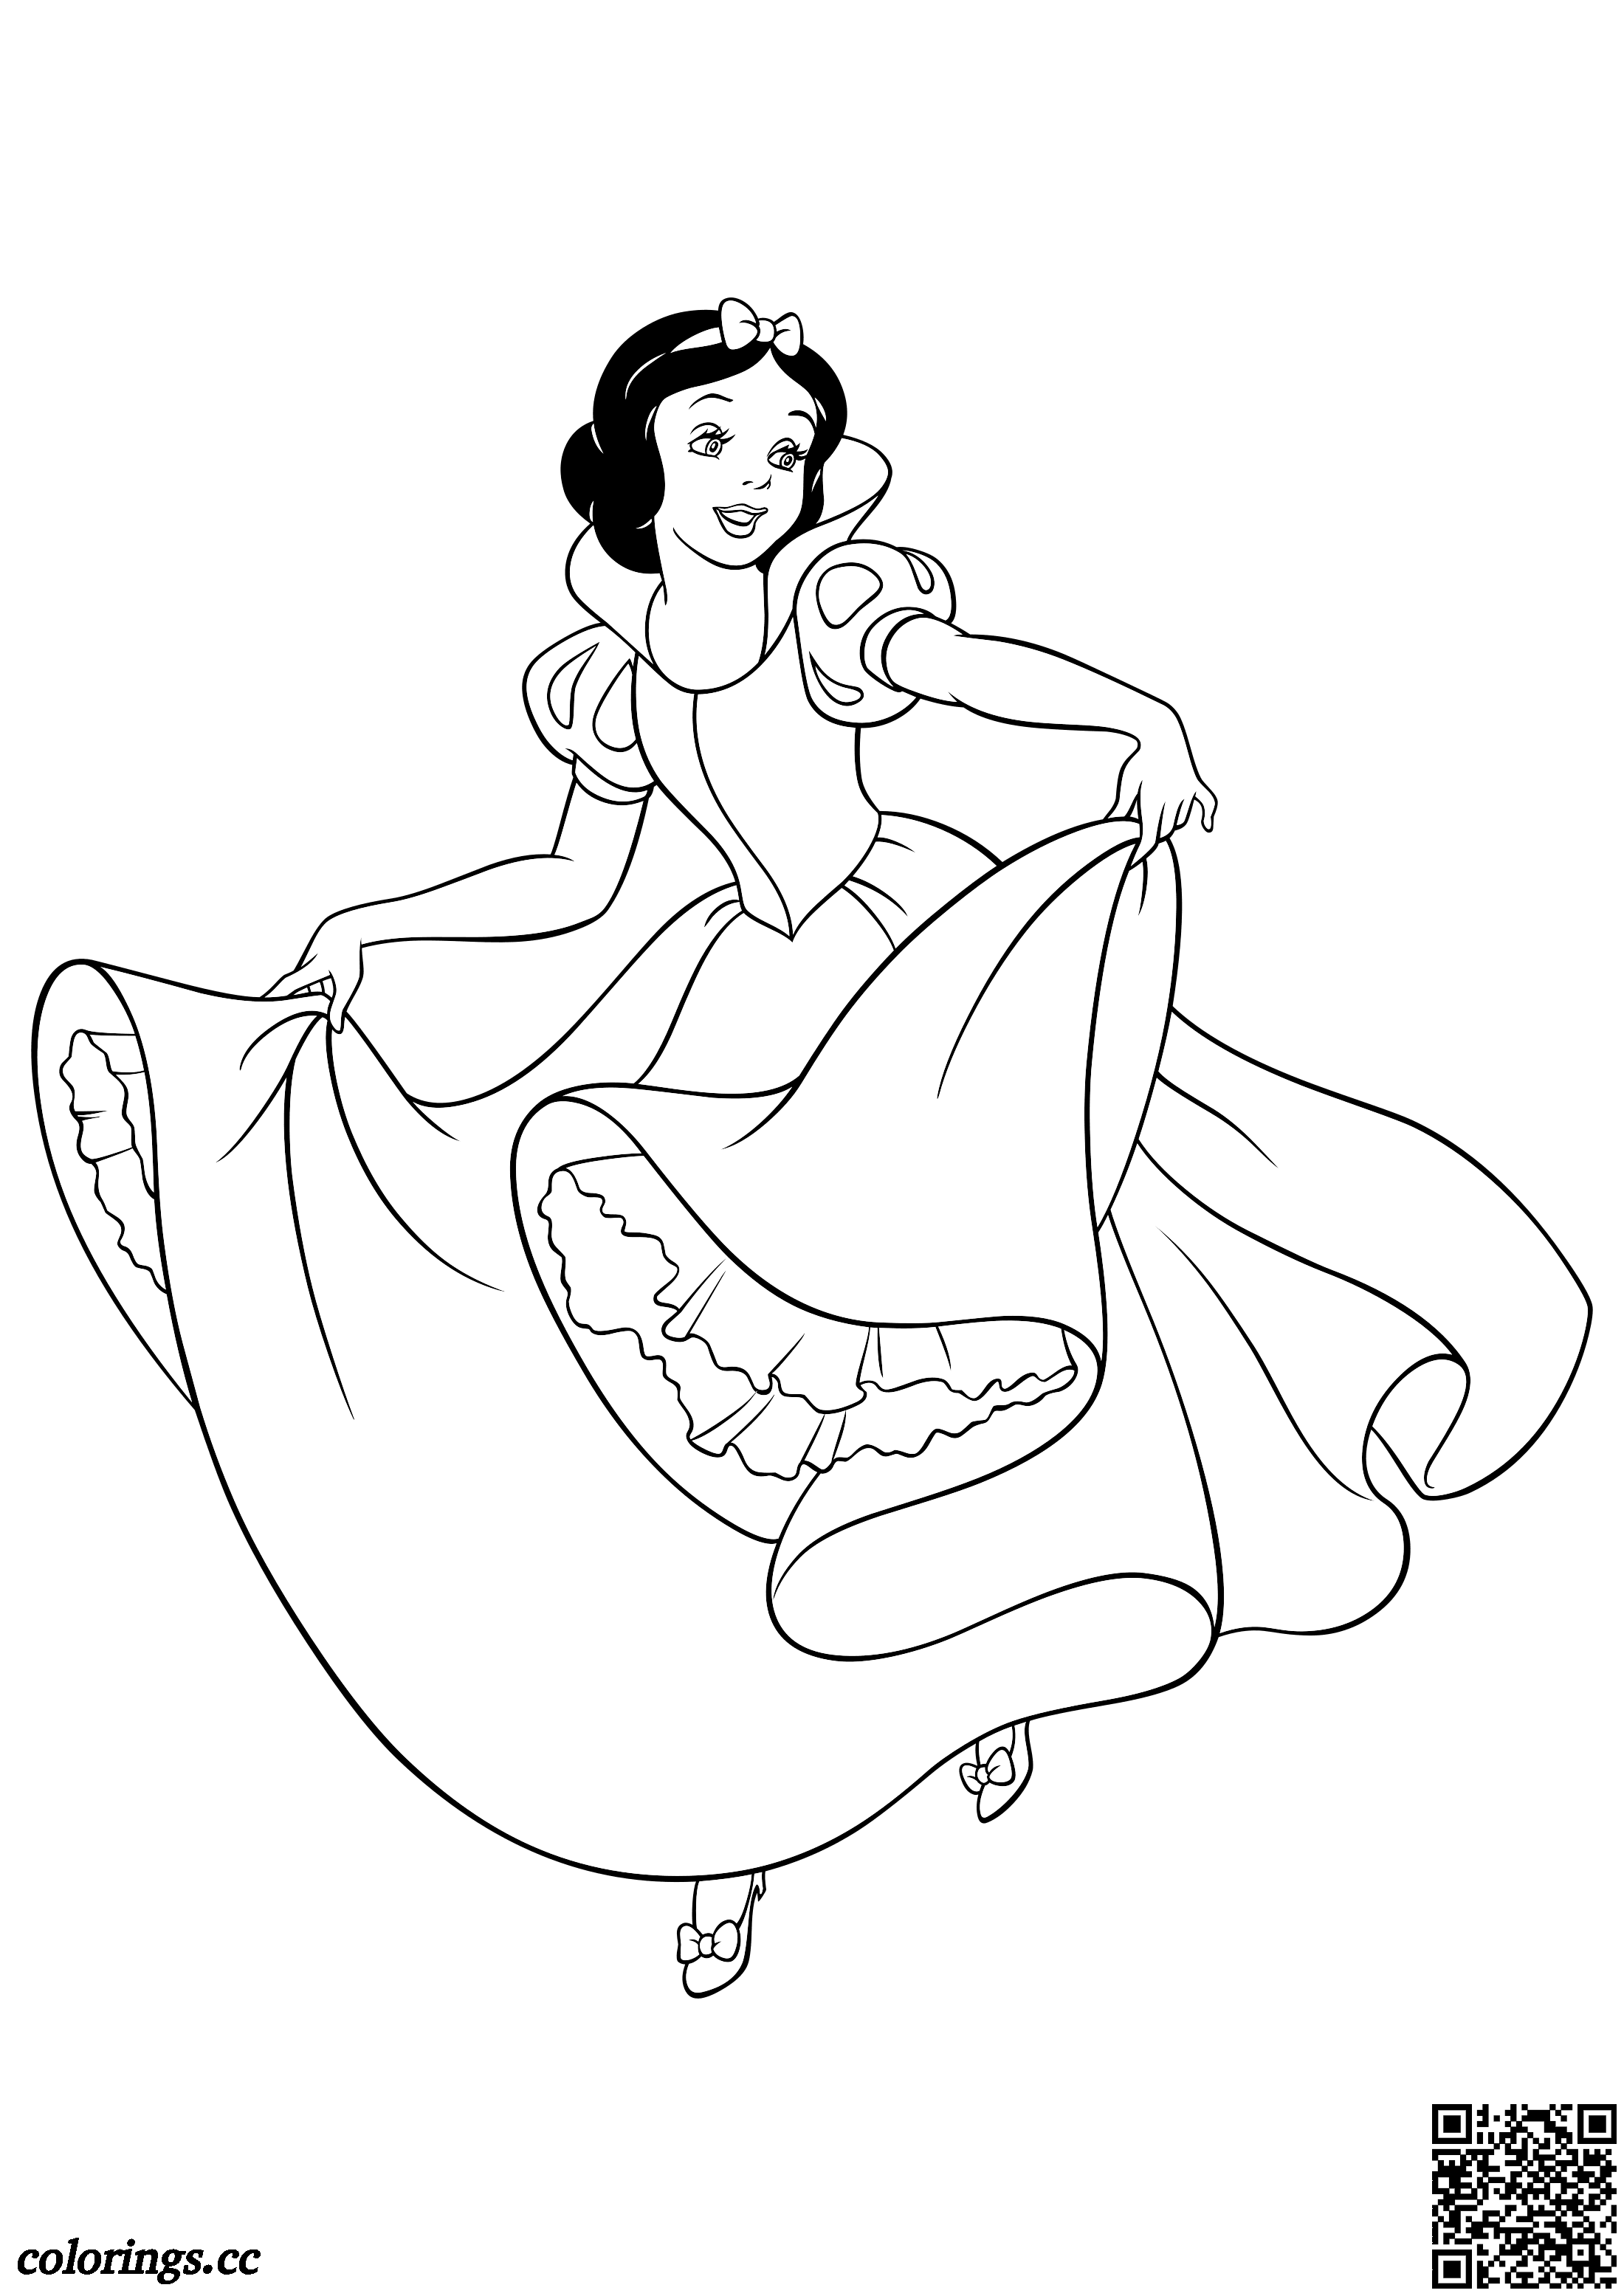 Snow white dancing coloring pages, Disney princesses coloring ...